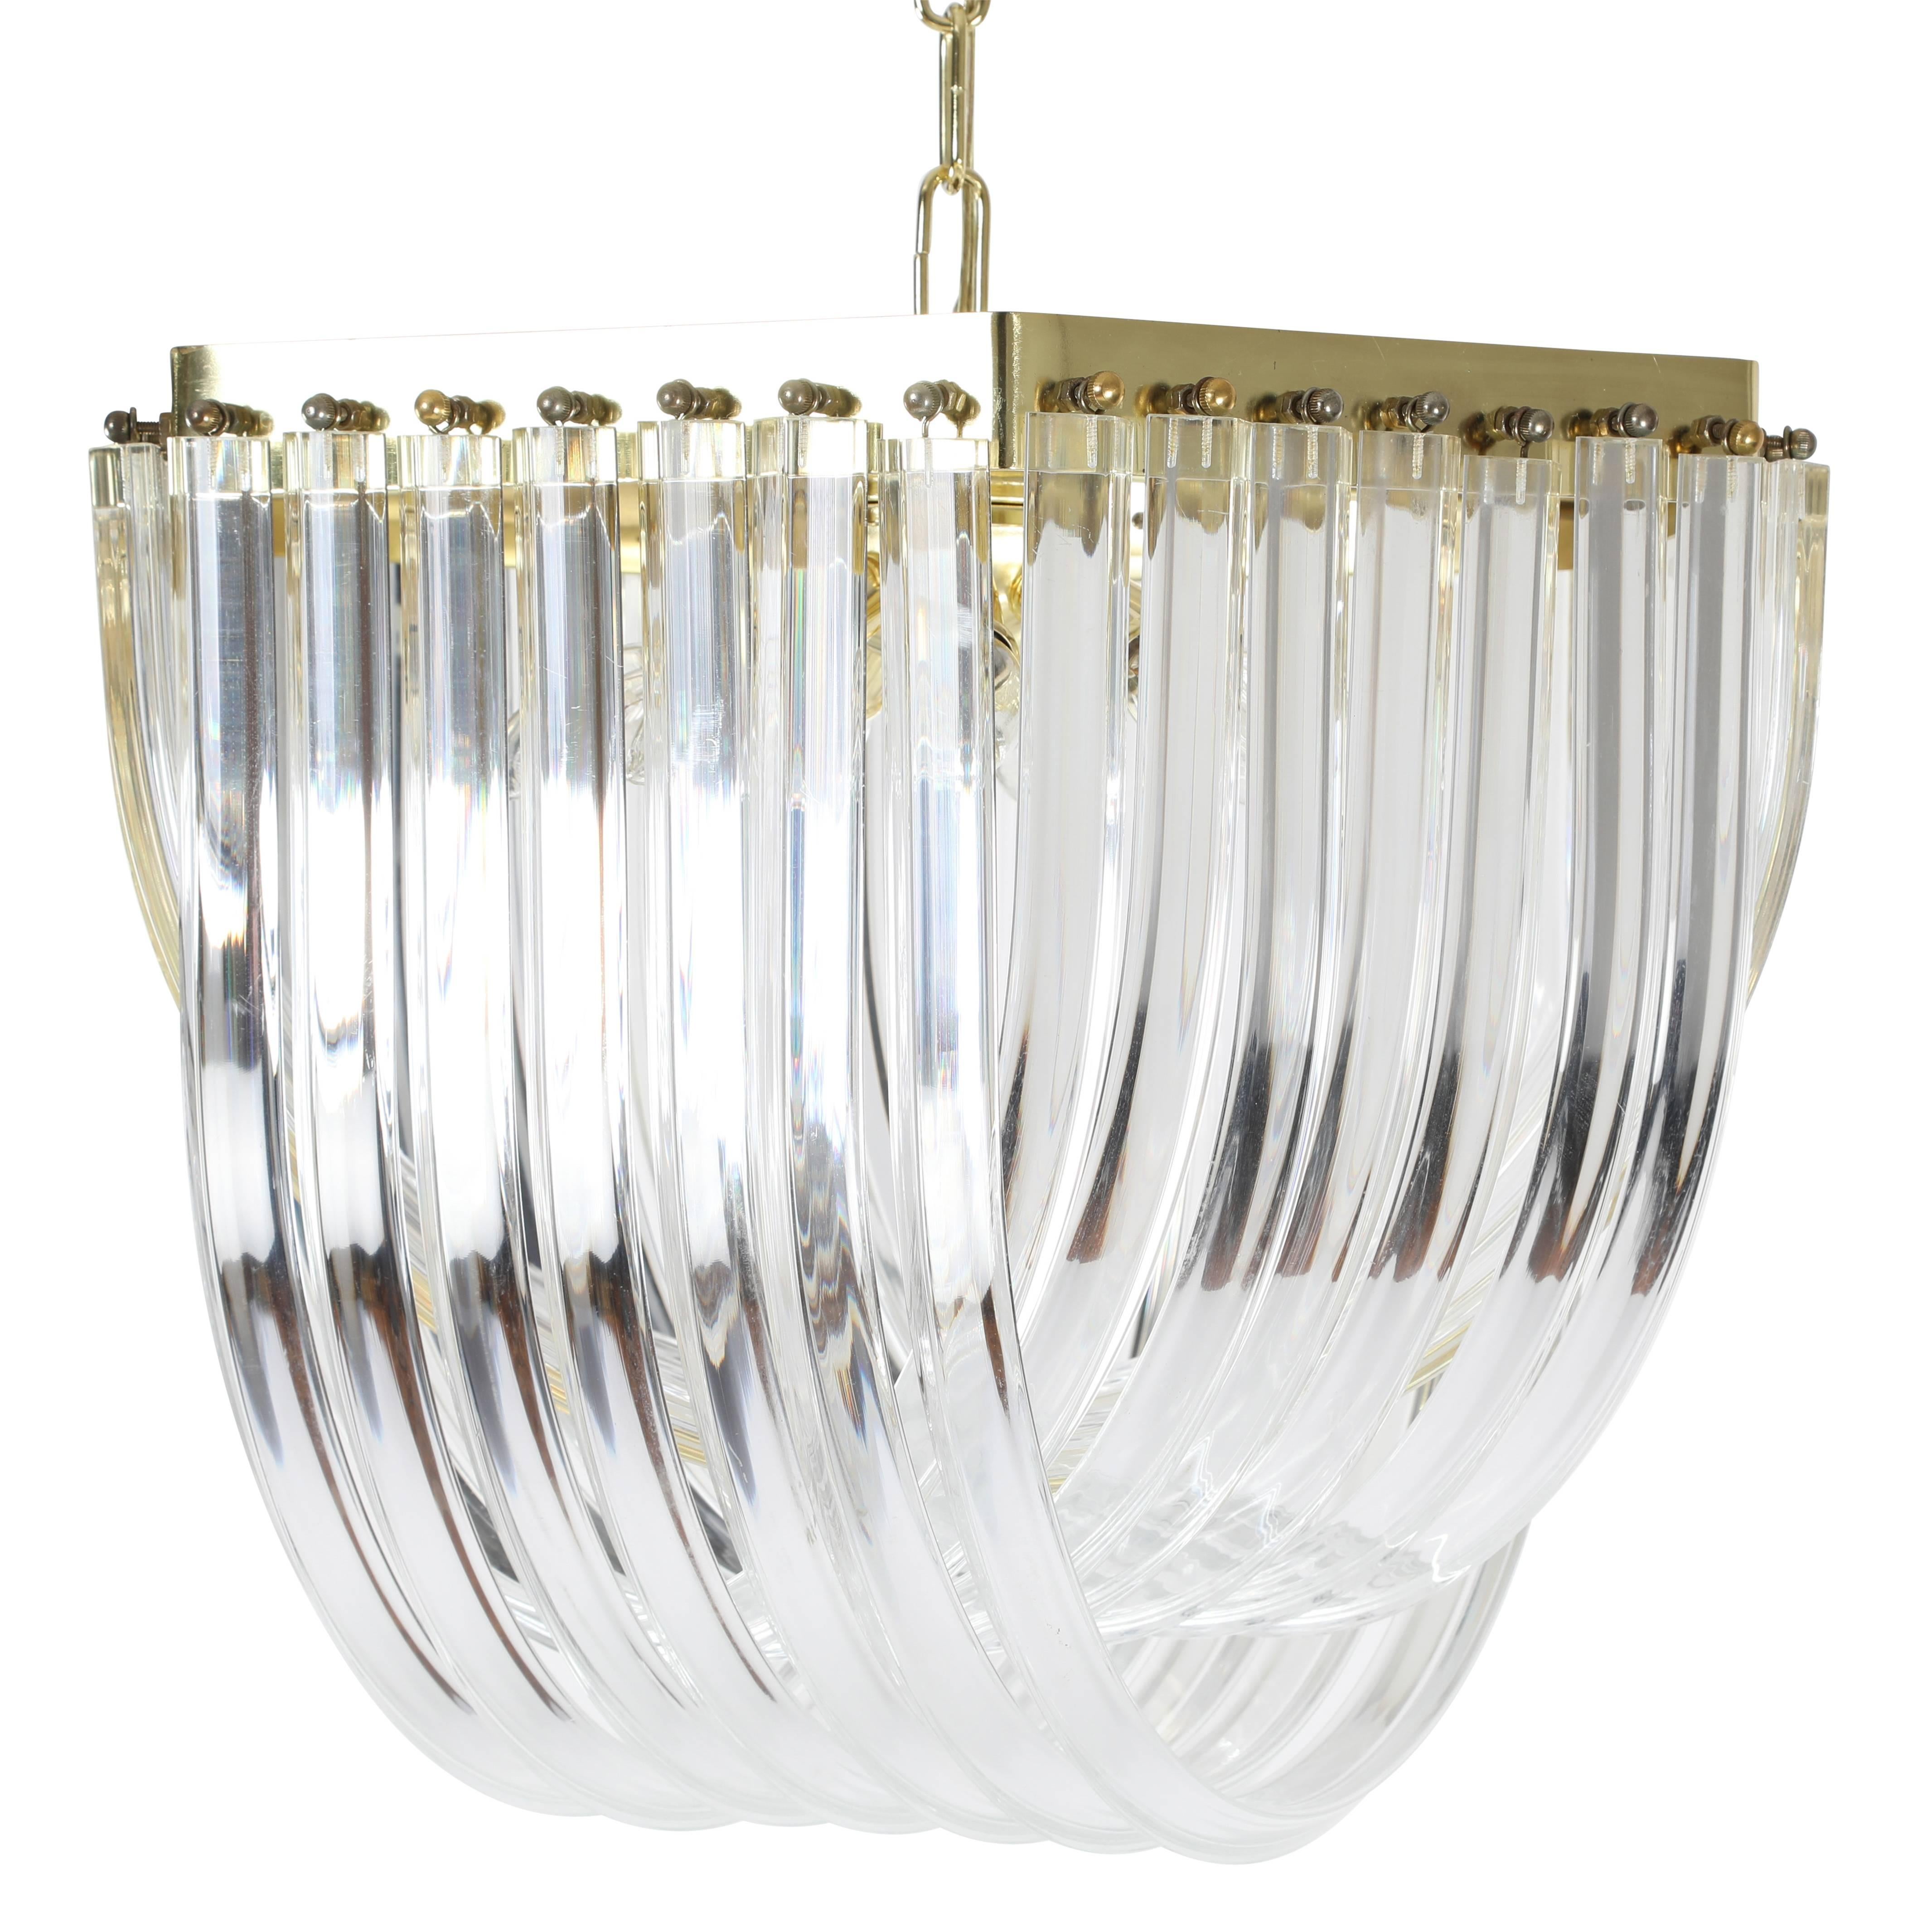 This vintage chandelier features 21 intersecting strands of bent and polished triangular Lucite, secured by brass hardware on a brass frame. Takes 10 40-watt candelabra bulbs. 

